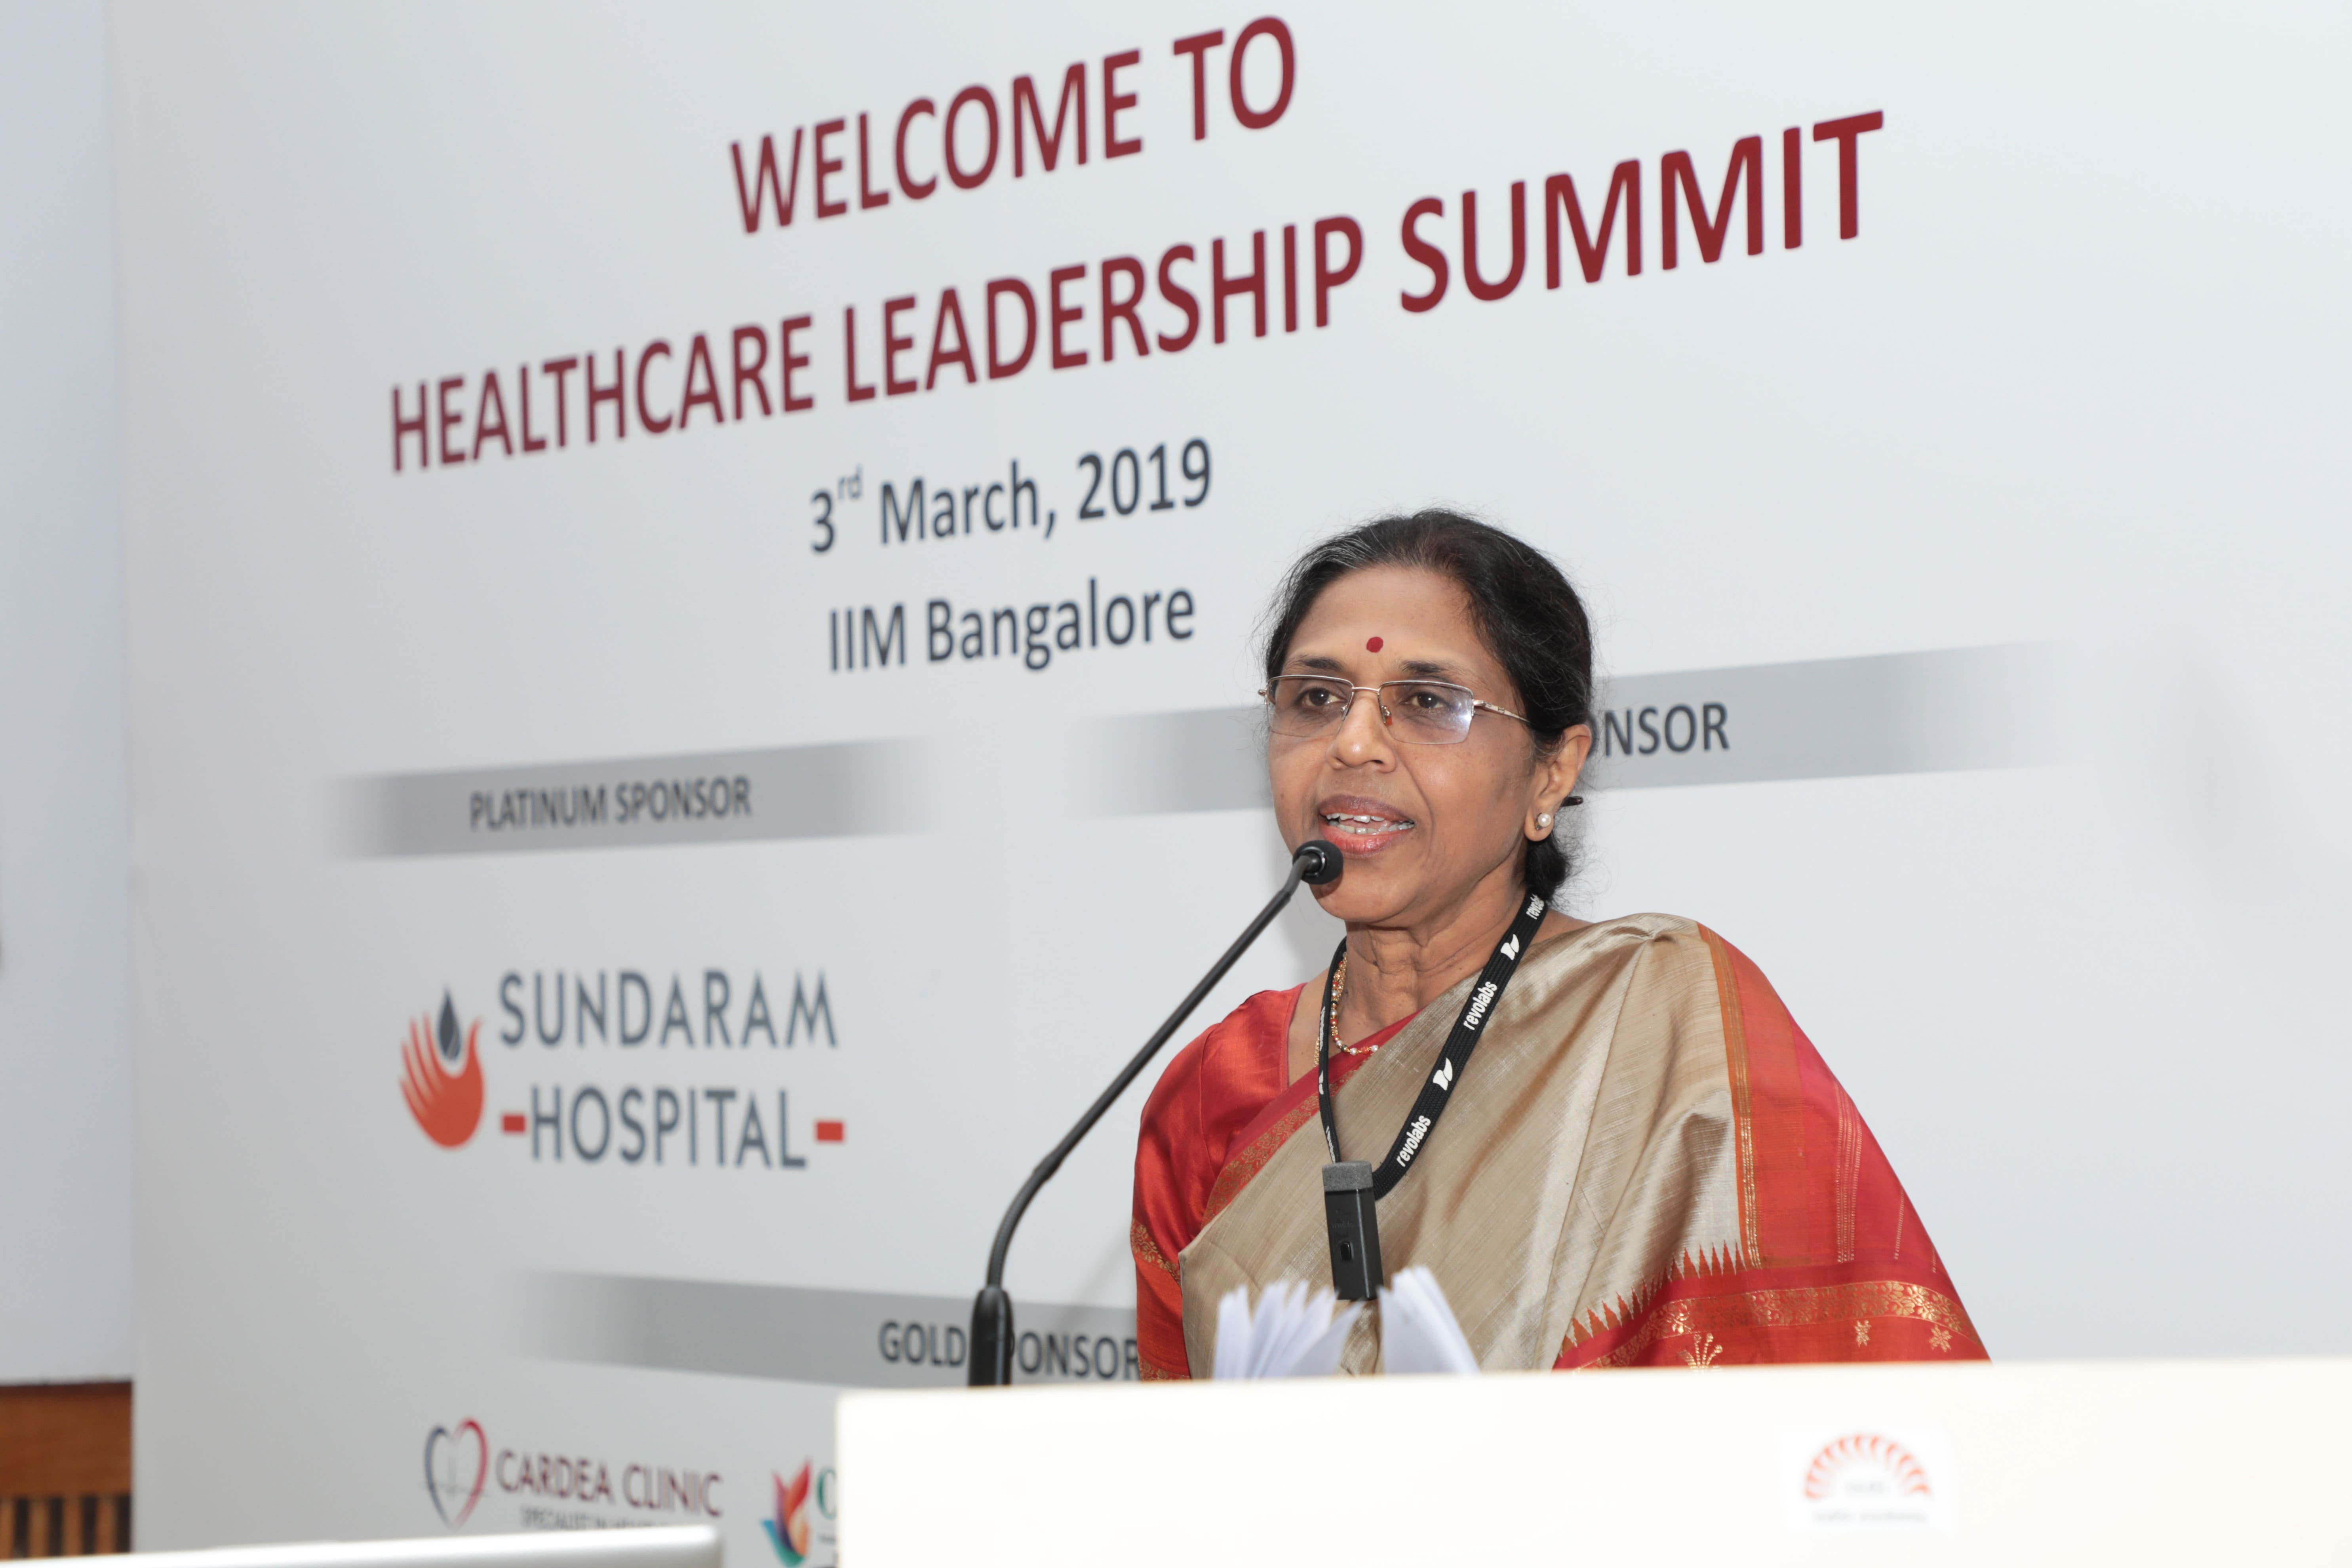 Dr. Chitra Sarkar, Dean (Research) and Professor of Pathology, AIIMS Delhi, speaks on ‘Leadership in Healthcare - Does it Demand Unique Qualities?’